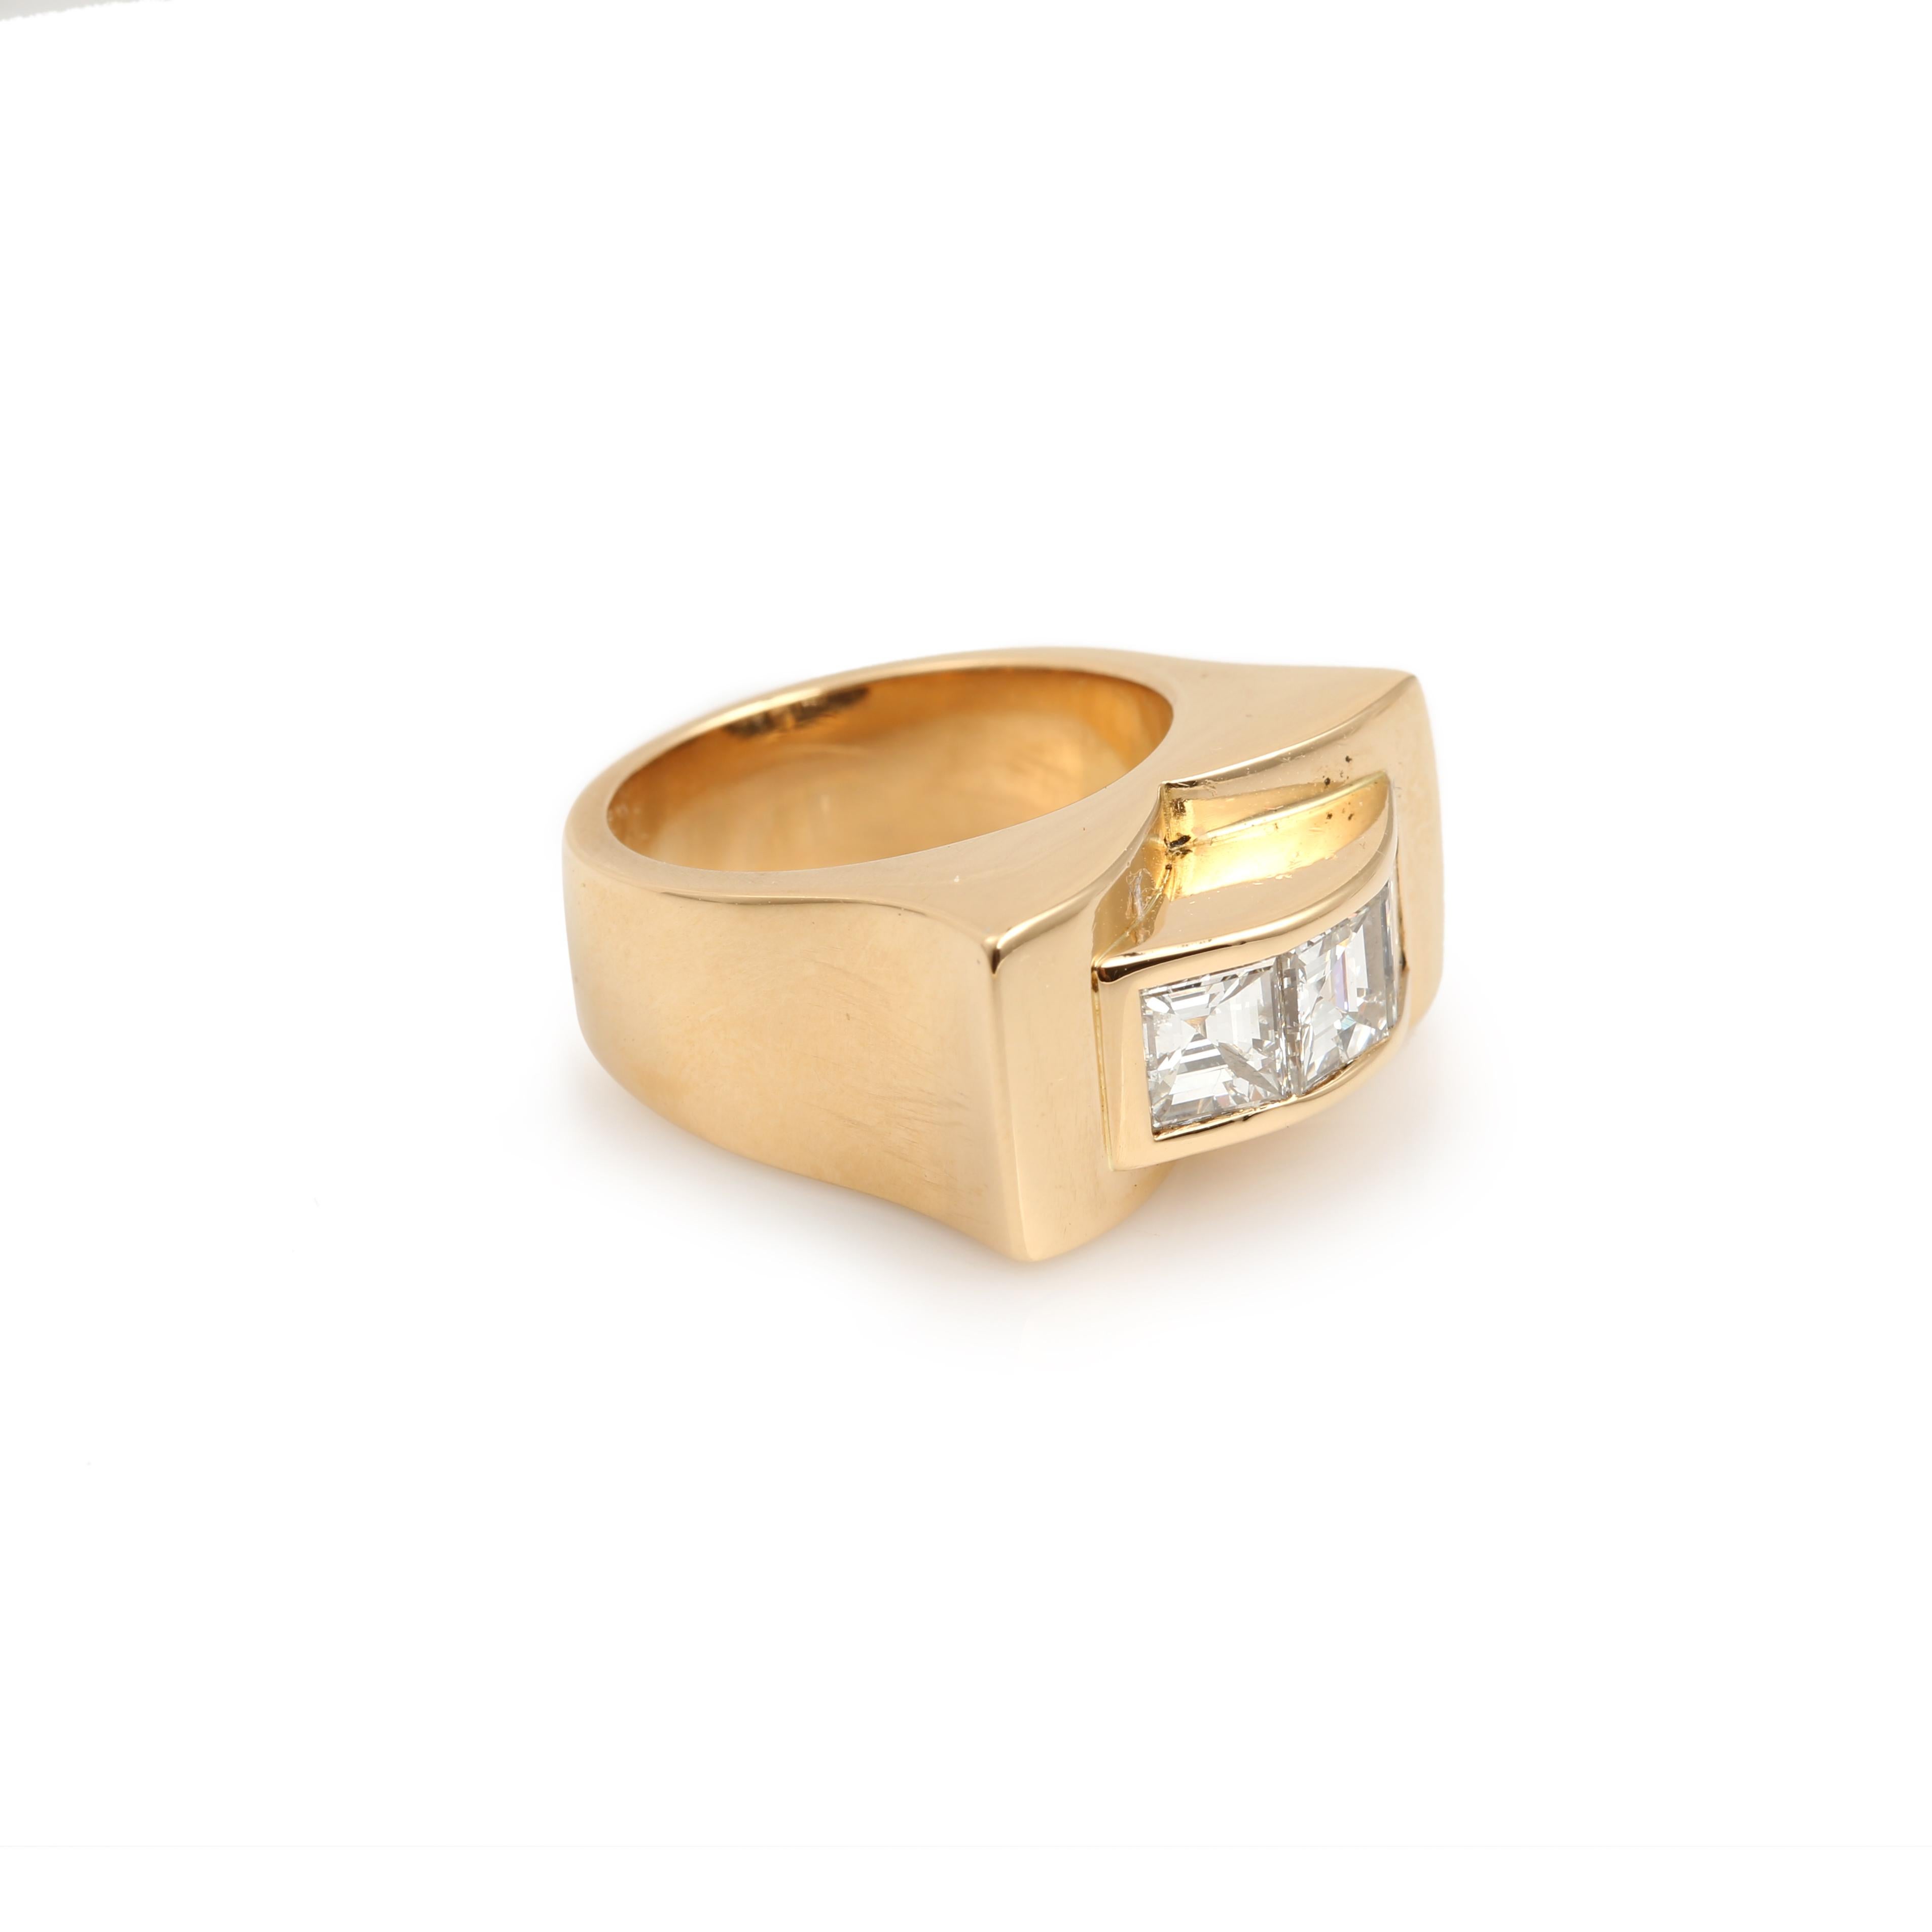 Fine yellow gold tank ring set with three princess cut diamonds.

Estimated weight of the 3 diamonds: 1.5 carats

Ring size : 20.75 x 10.86 x 7.96 mm (0.817 x 0.427 x 0.313inch)

Finger size : 51 (US : 5.75)

French work circa 1940-1950

18K yellow